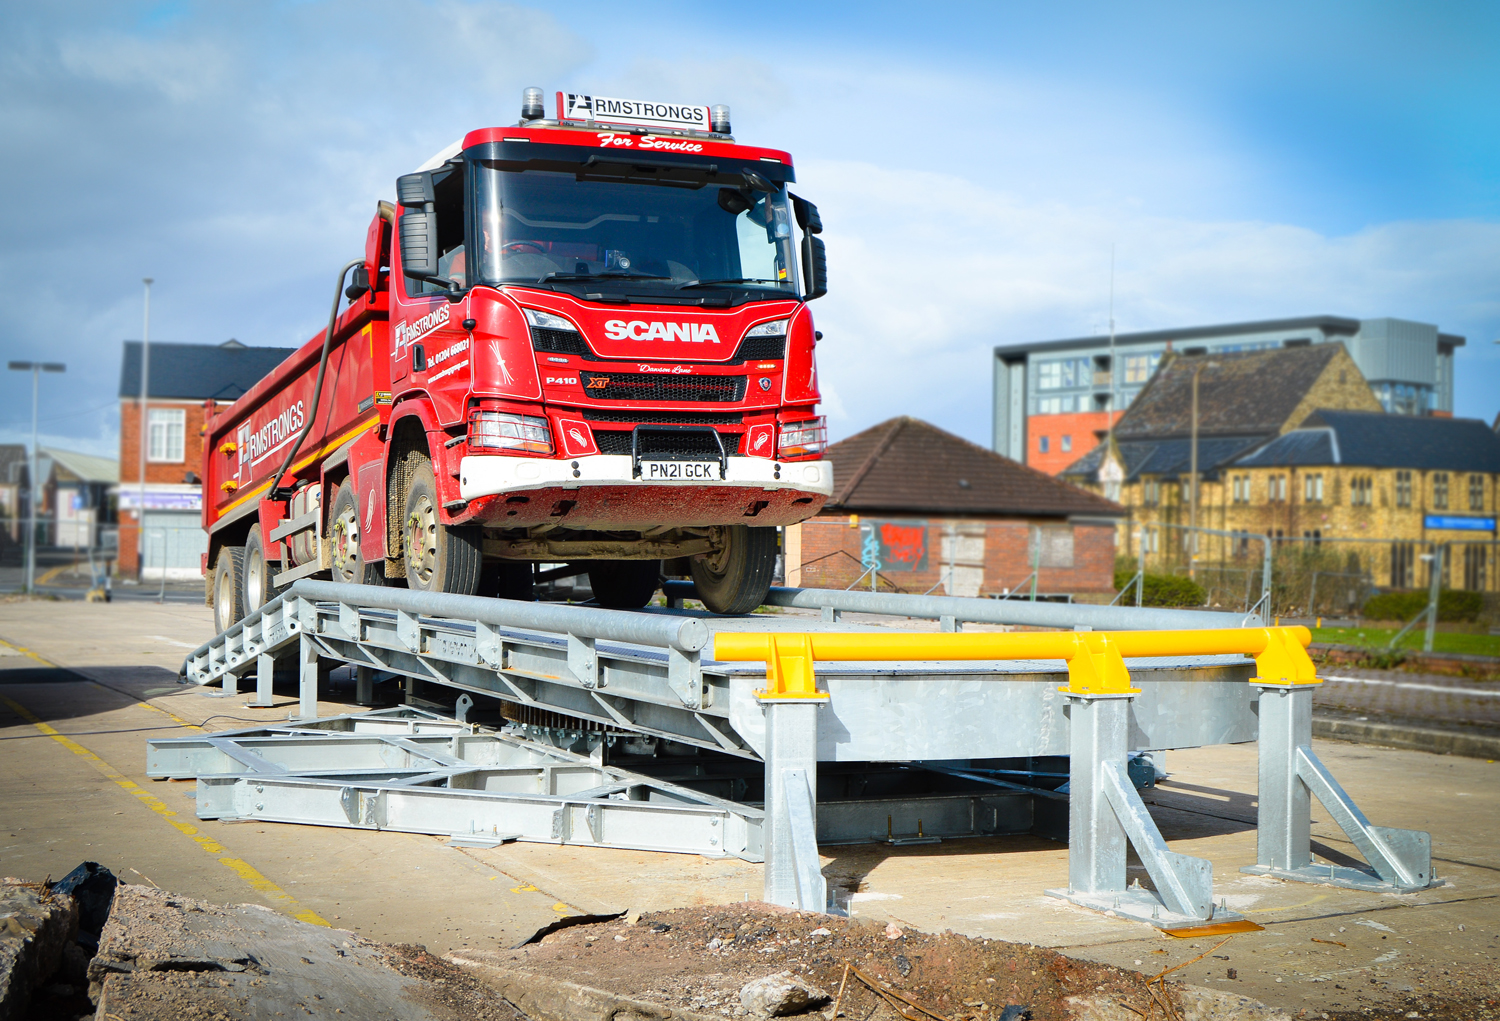 Innovative truck turntable by Movetech UK is set to strengthen safety and efficiency in the Construction Site industry